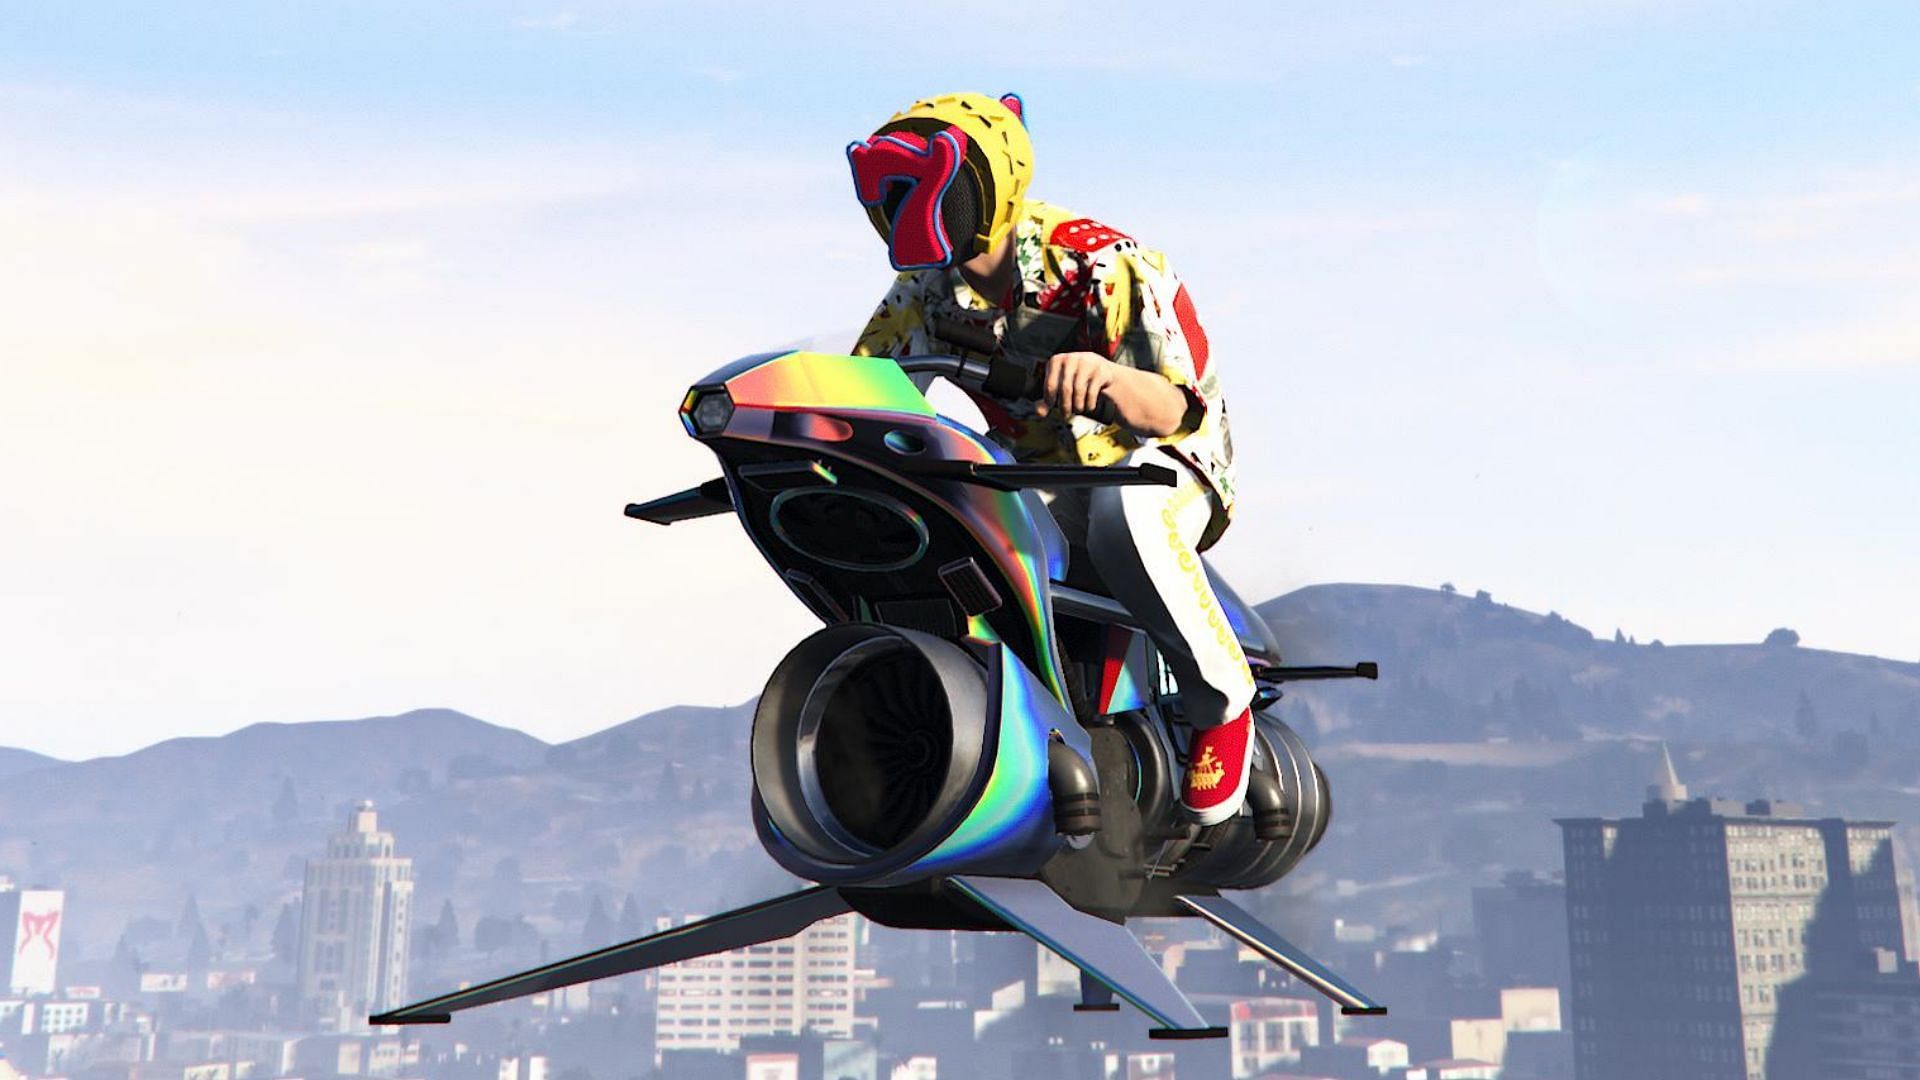 This flying motorcycle will be nerfed soon in GTA Online (Image via Rockstar Games)